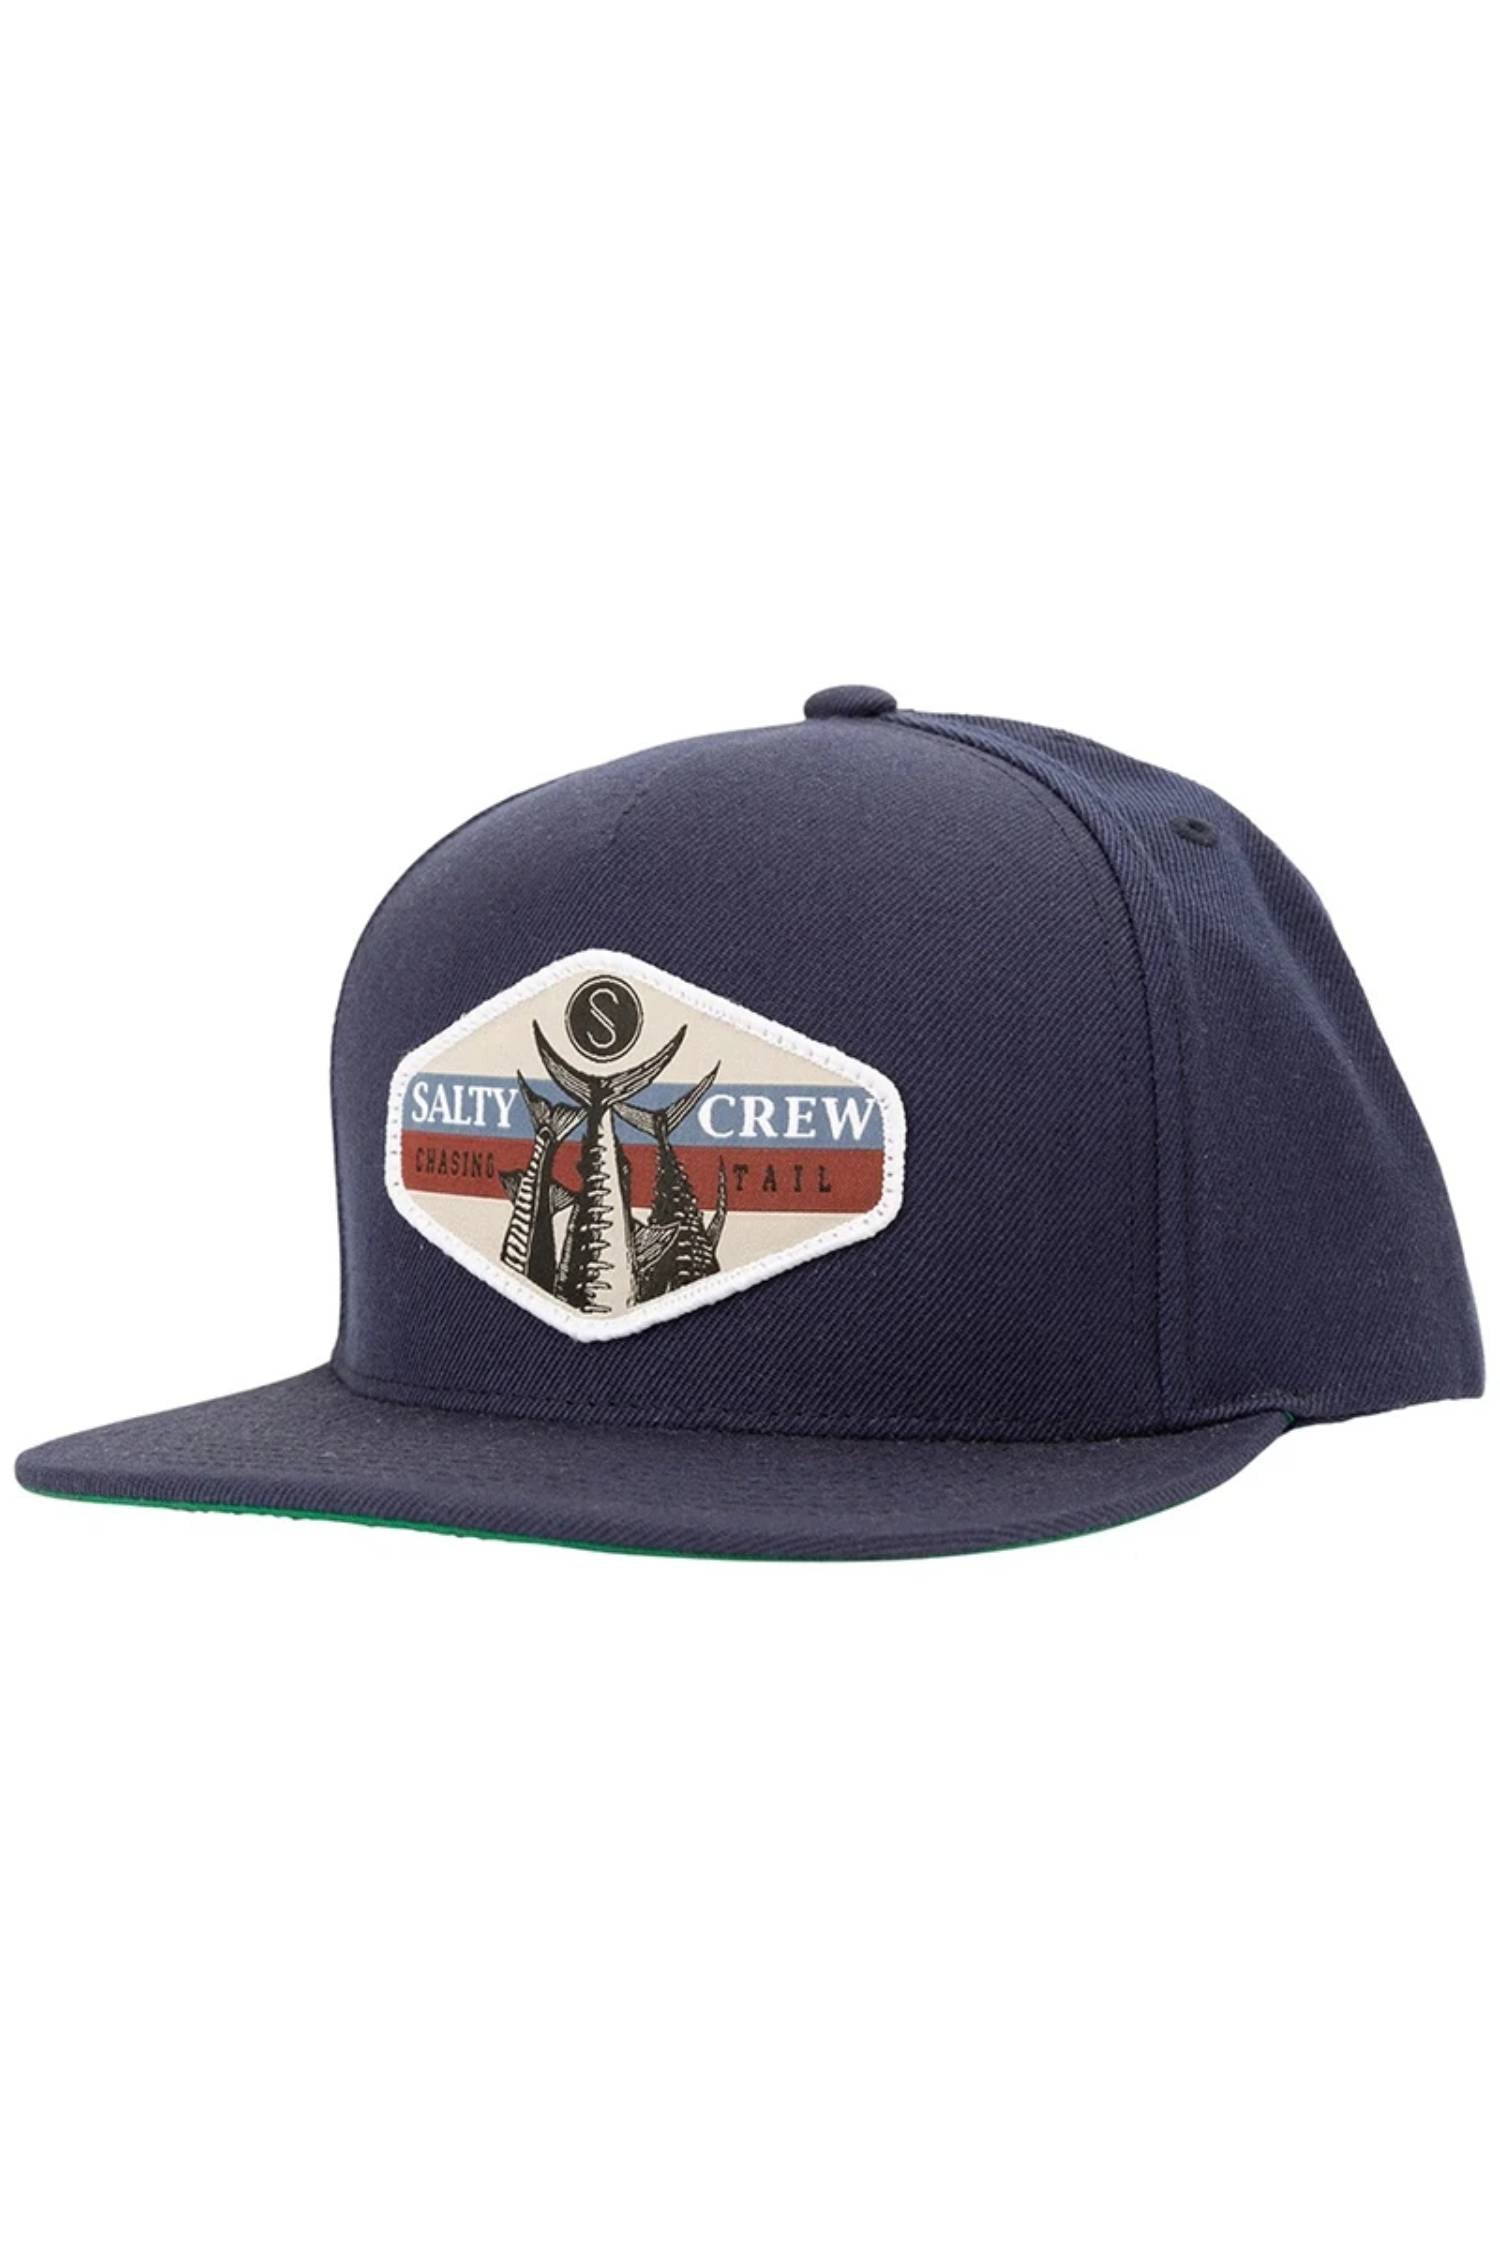 Salty Crew High Tail 5 Panel Hat Navy One Size